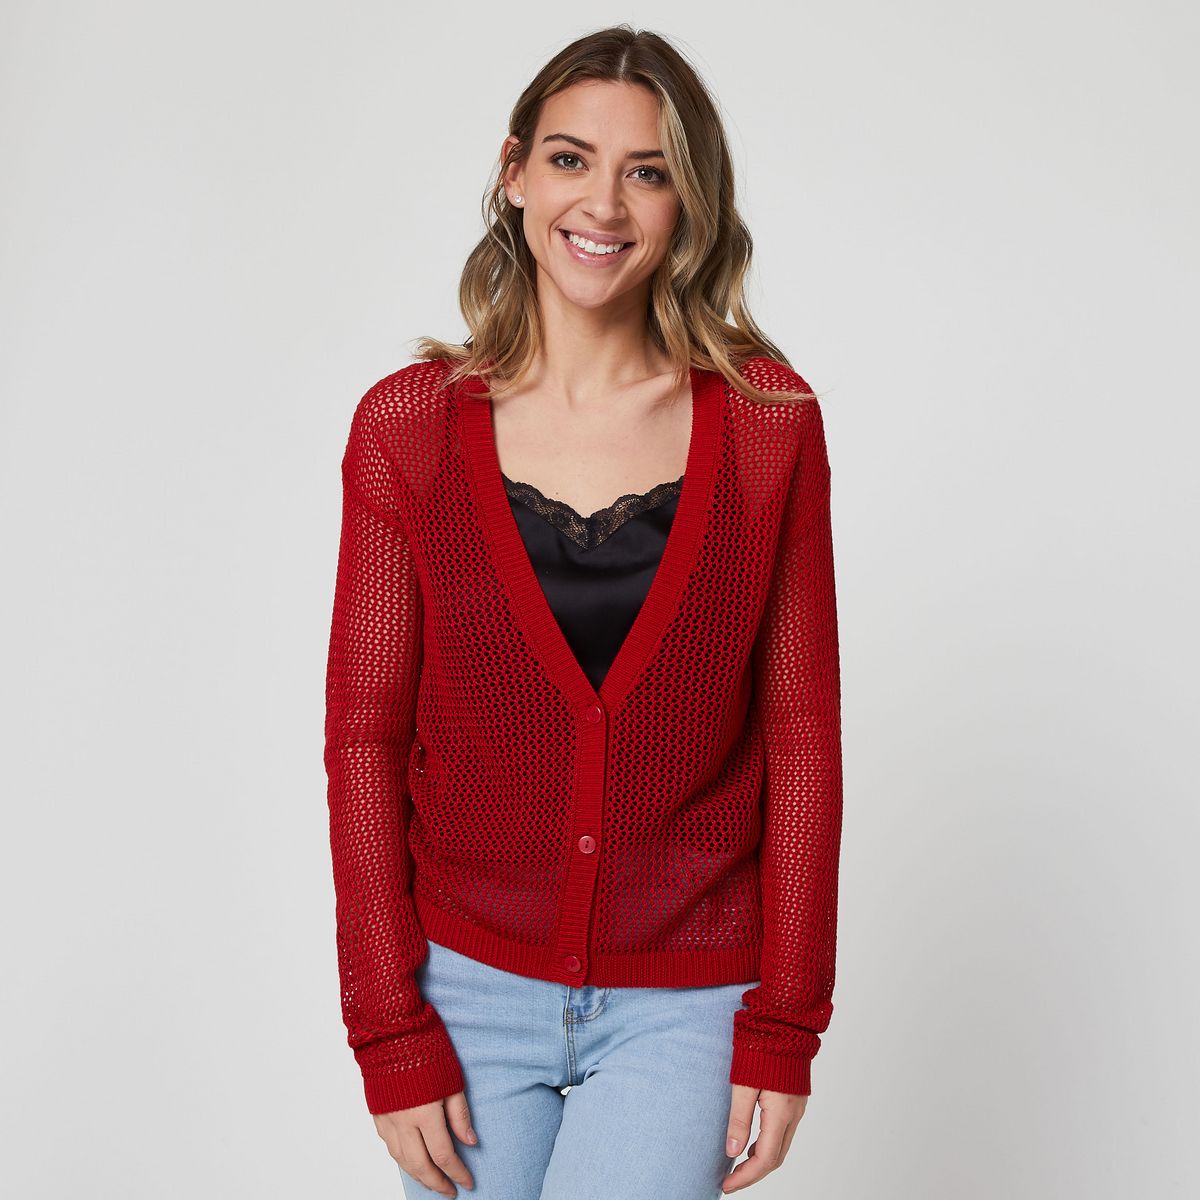 IN EXTENSO Gilet femme Rouge taille M pas cher - Auchan.fr